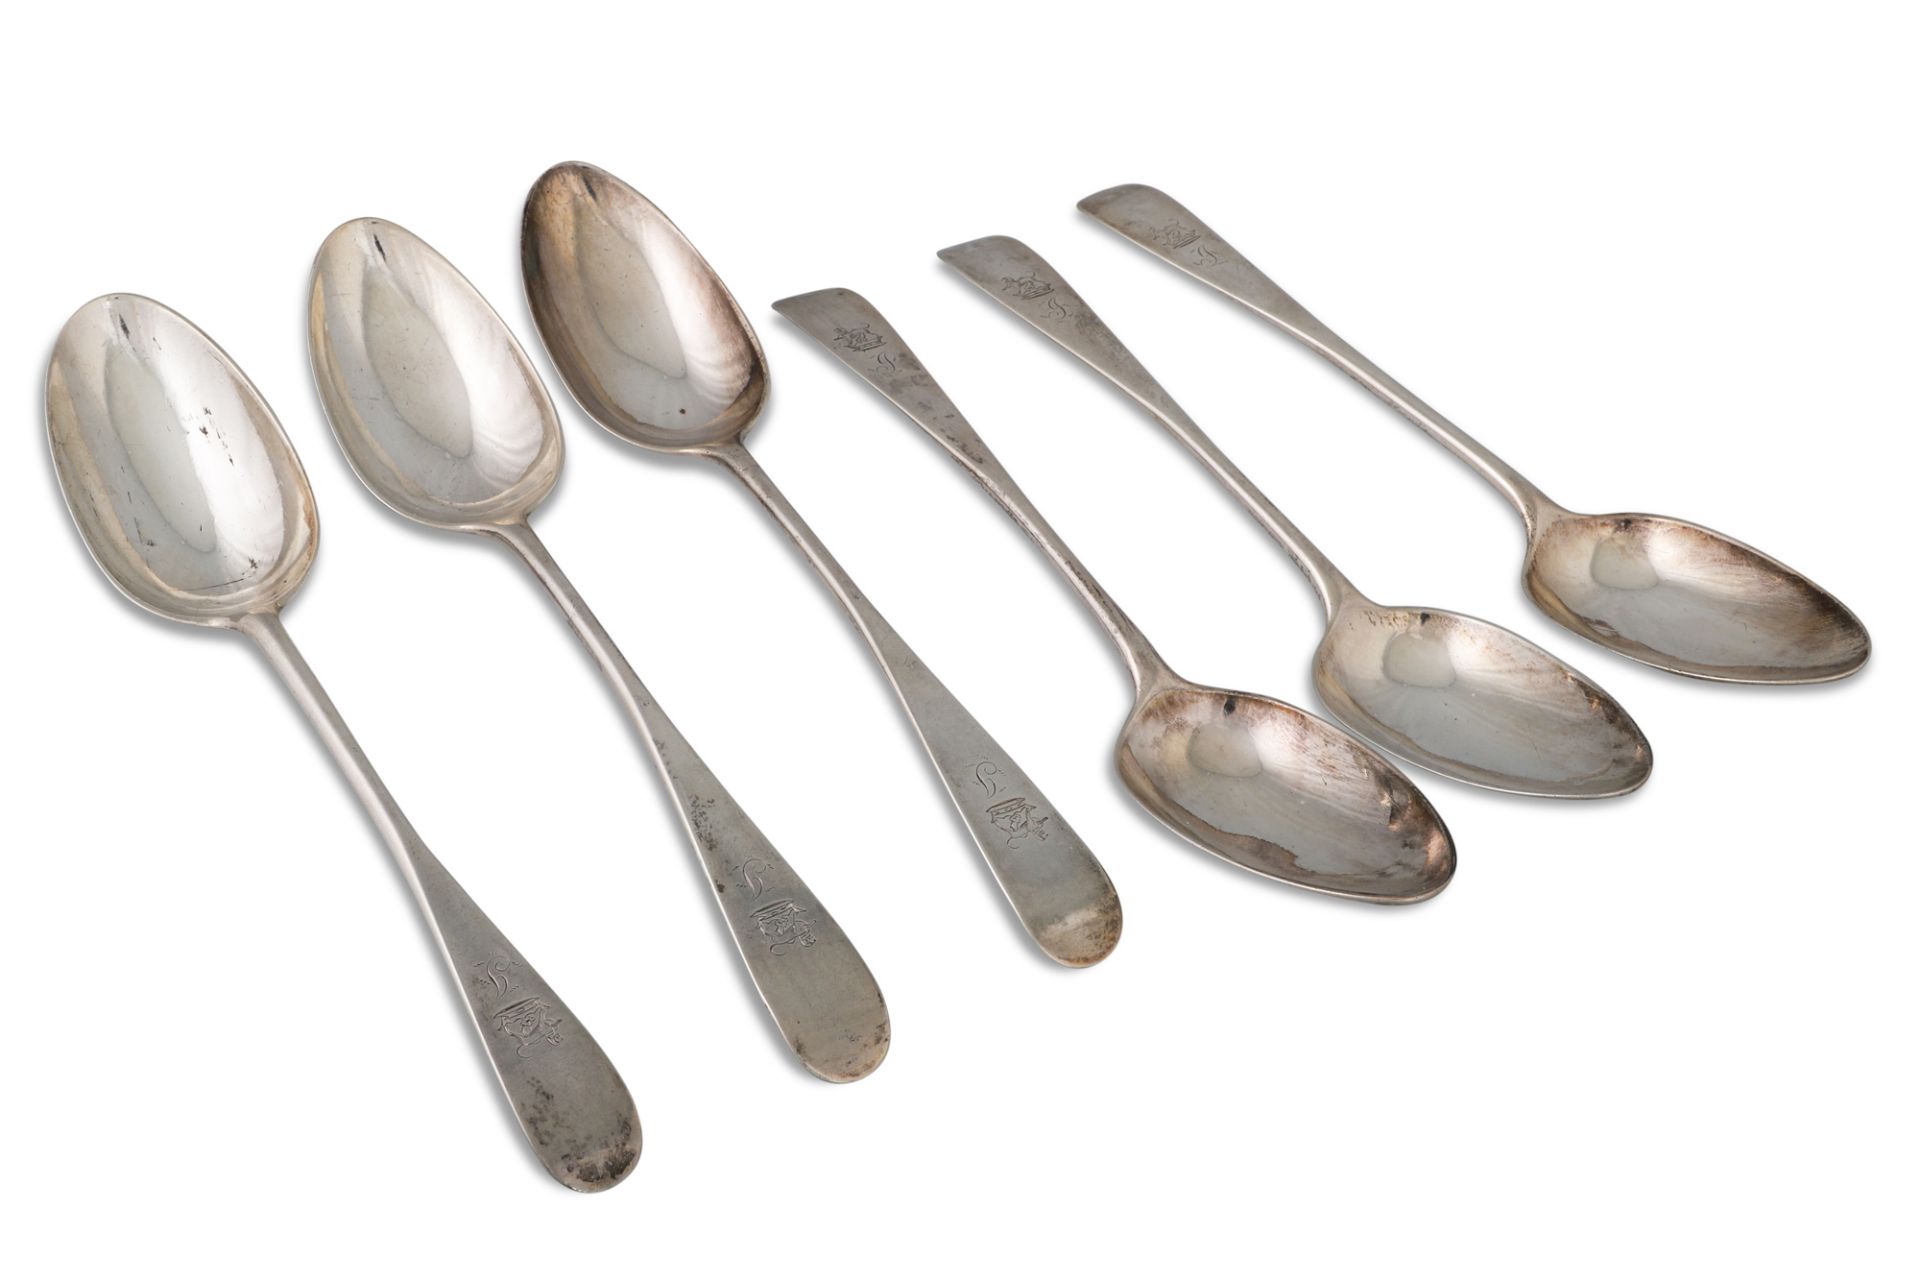 A FINE QUALITY SET OF SIX GEORGE III SCOTTISH SILVER TABLE SPOONS, crested Edinburgh 1792, by Robert